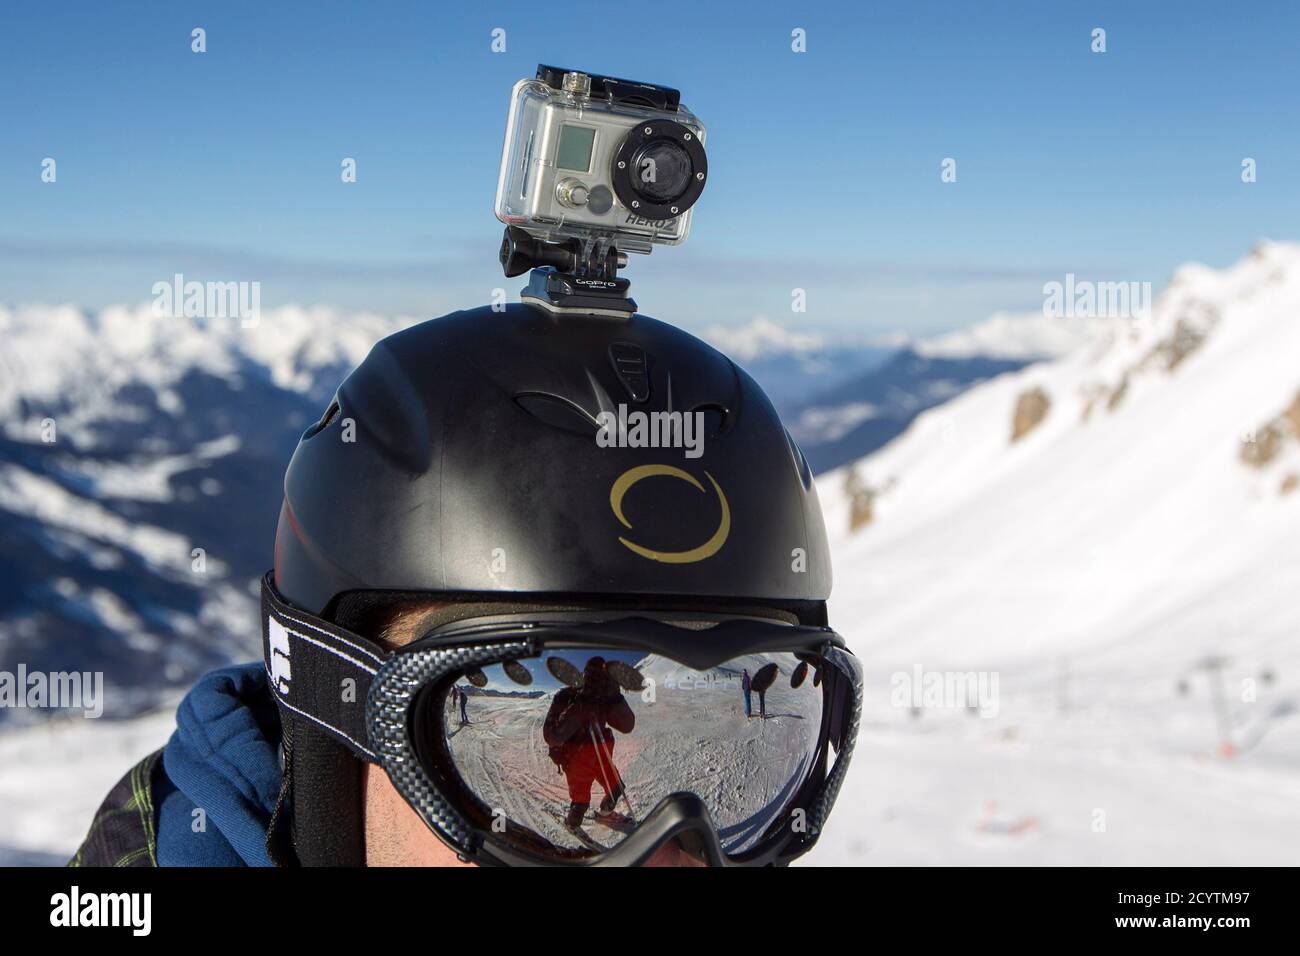 A GoPro camera is seen on a skier's helmet as he rides down the slopes in  the ski resort of Meribel, French Alps, January 7, 2014. Michael  Schumacher's wife appealed to the